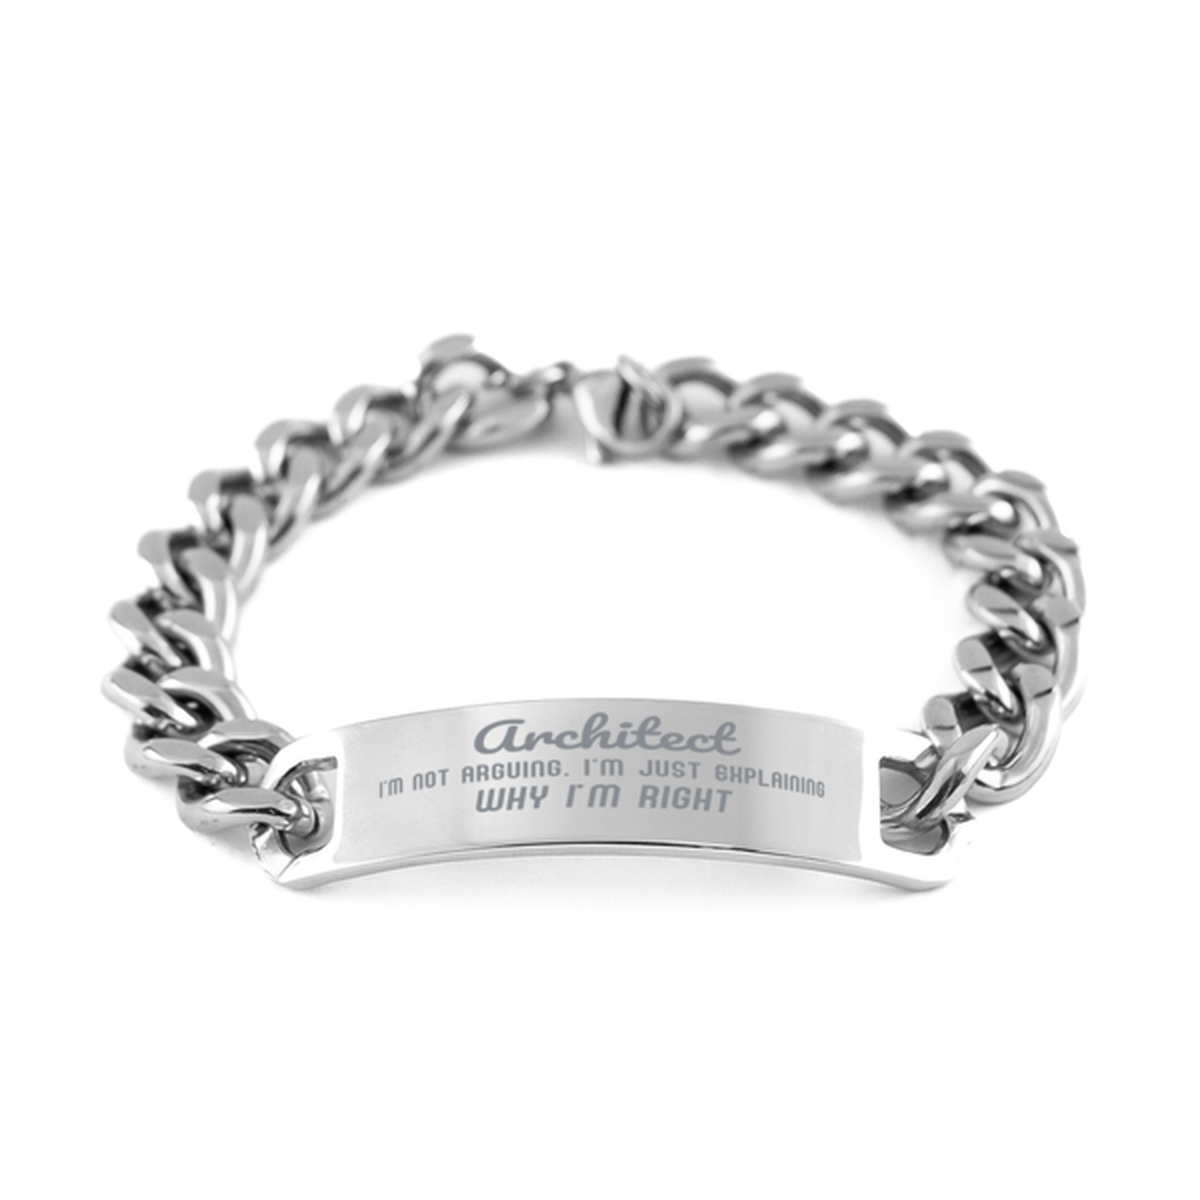 Architect I'm not Arguing. I'm Just Explaining Why I'm RIGHT Cuban Chain Stainless Steel Bracelet, Graduation Birthday Christmas Architect Gifts For Architect Funny Saying Quote Present for Men Women Coworker